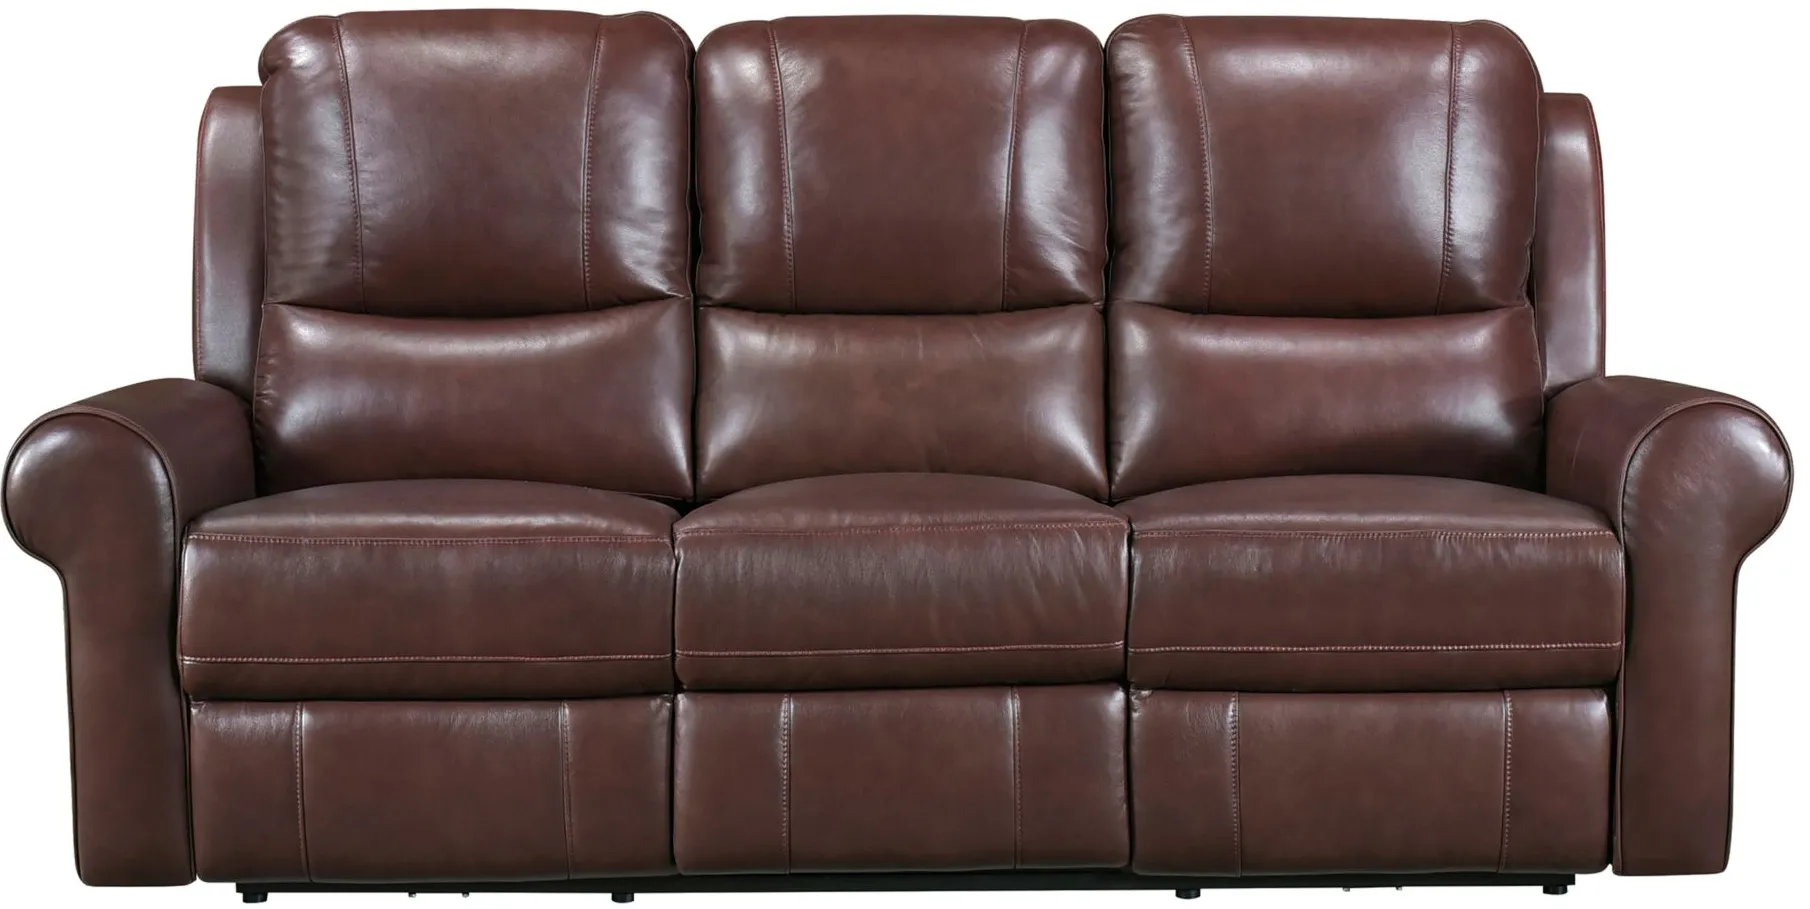 Fairview Power Double Reclining Sofa in Brown by Homelegance